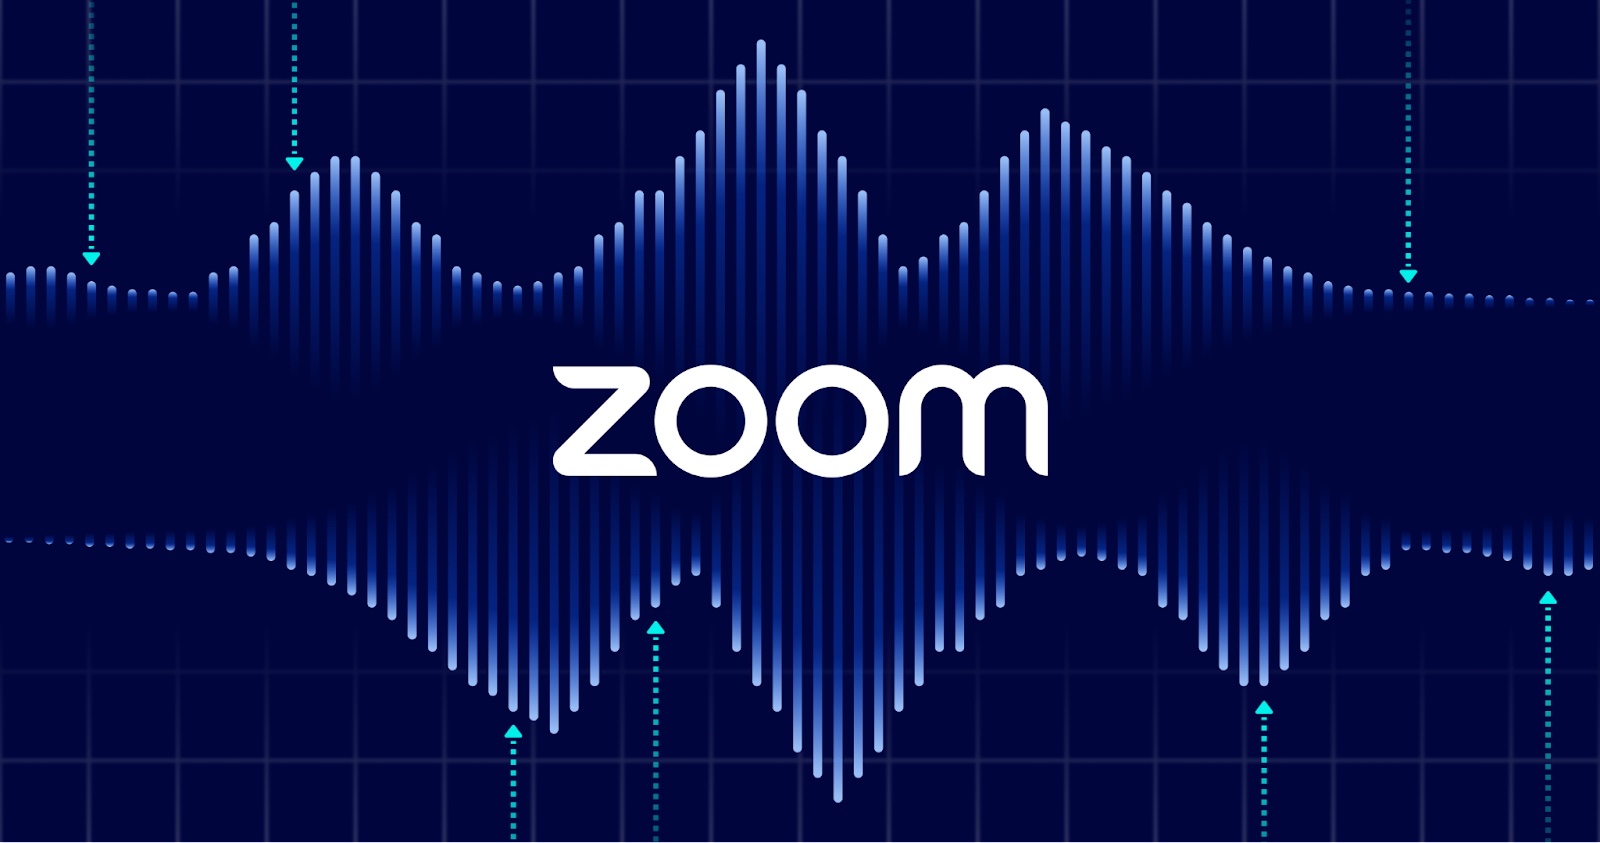 Zoom's AI innovations empower people